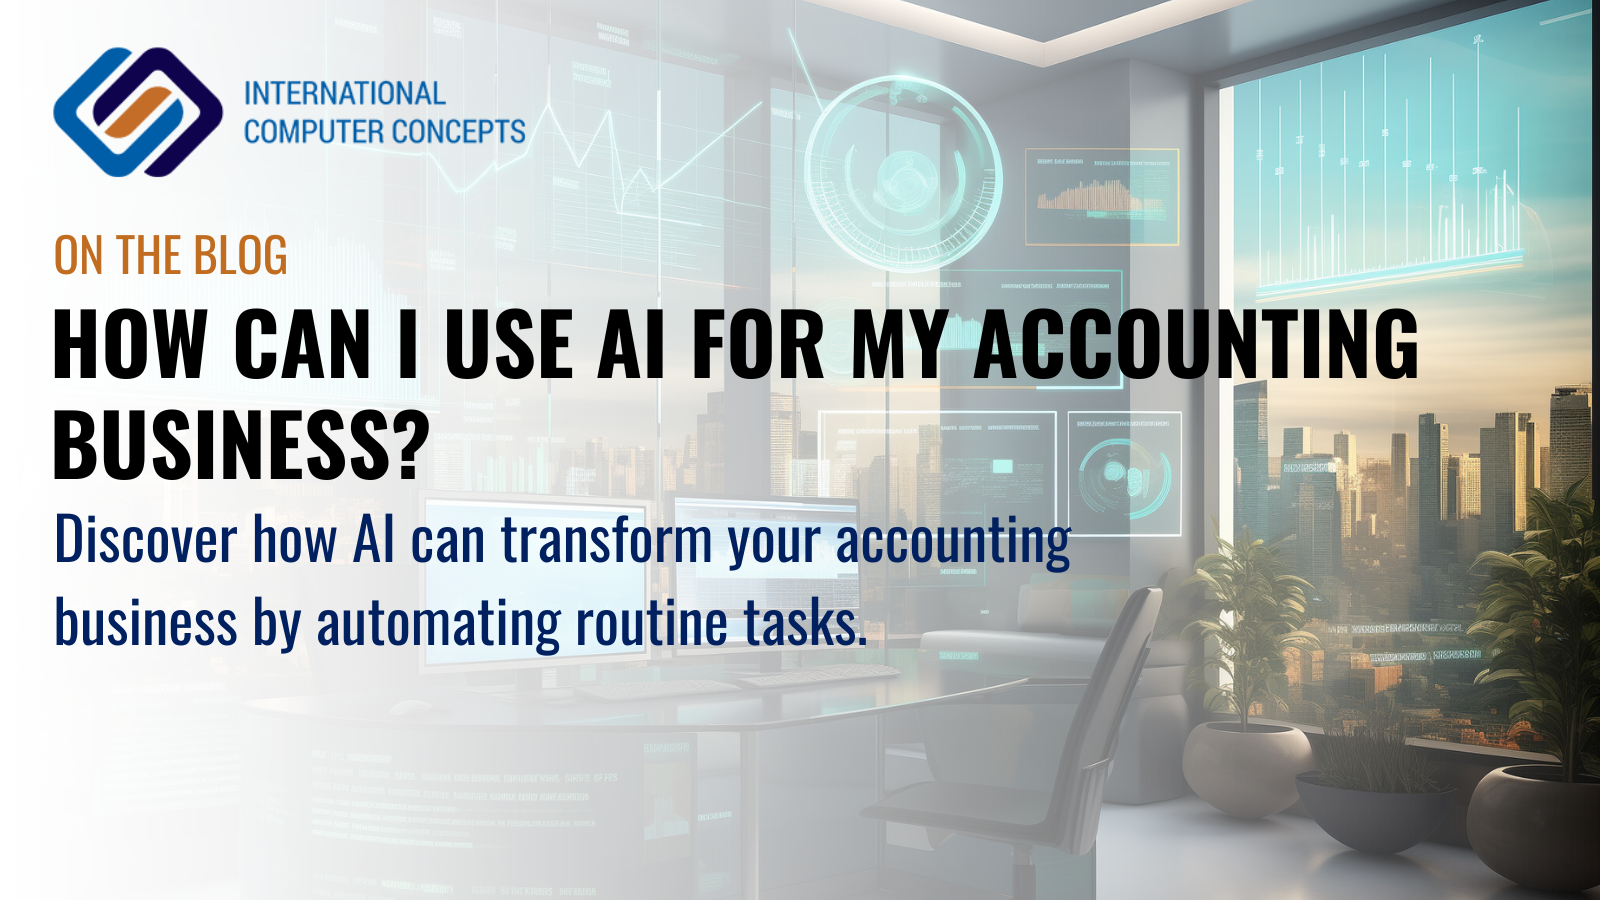 How can I use AI for my accounting business?